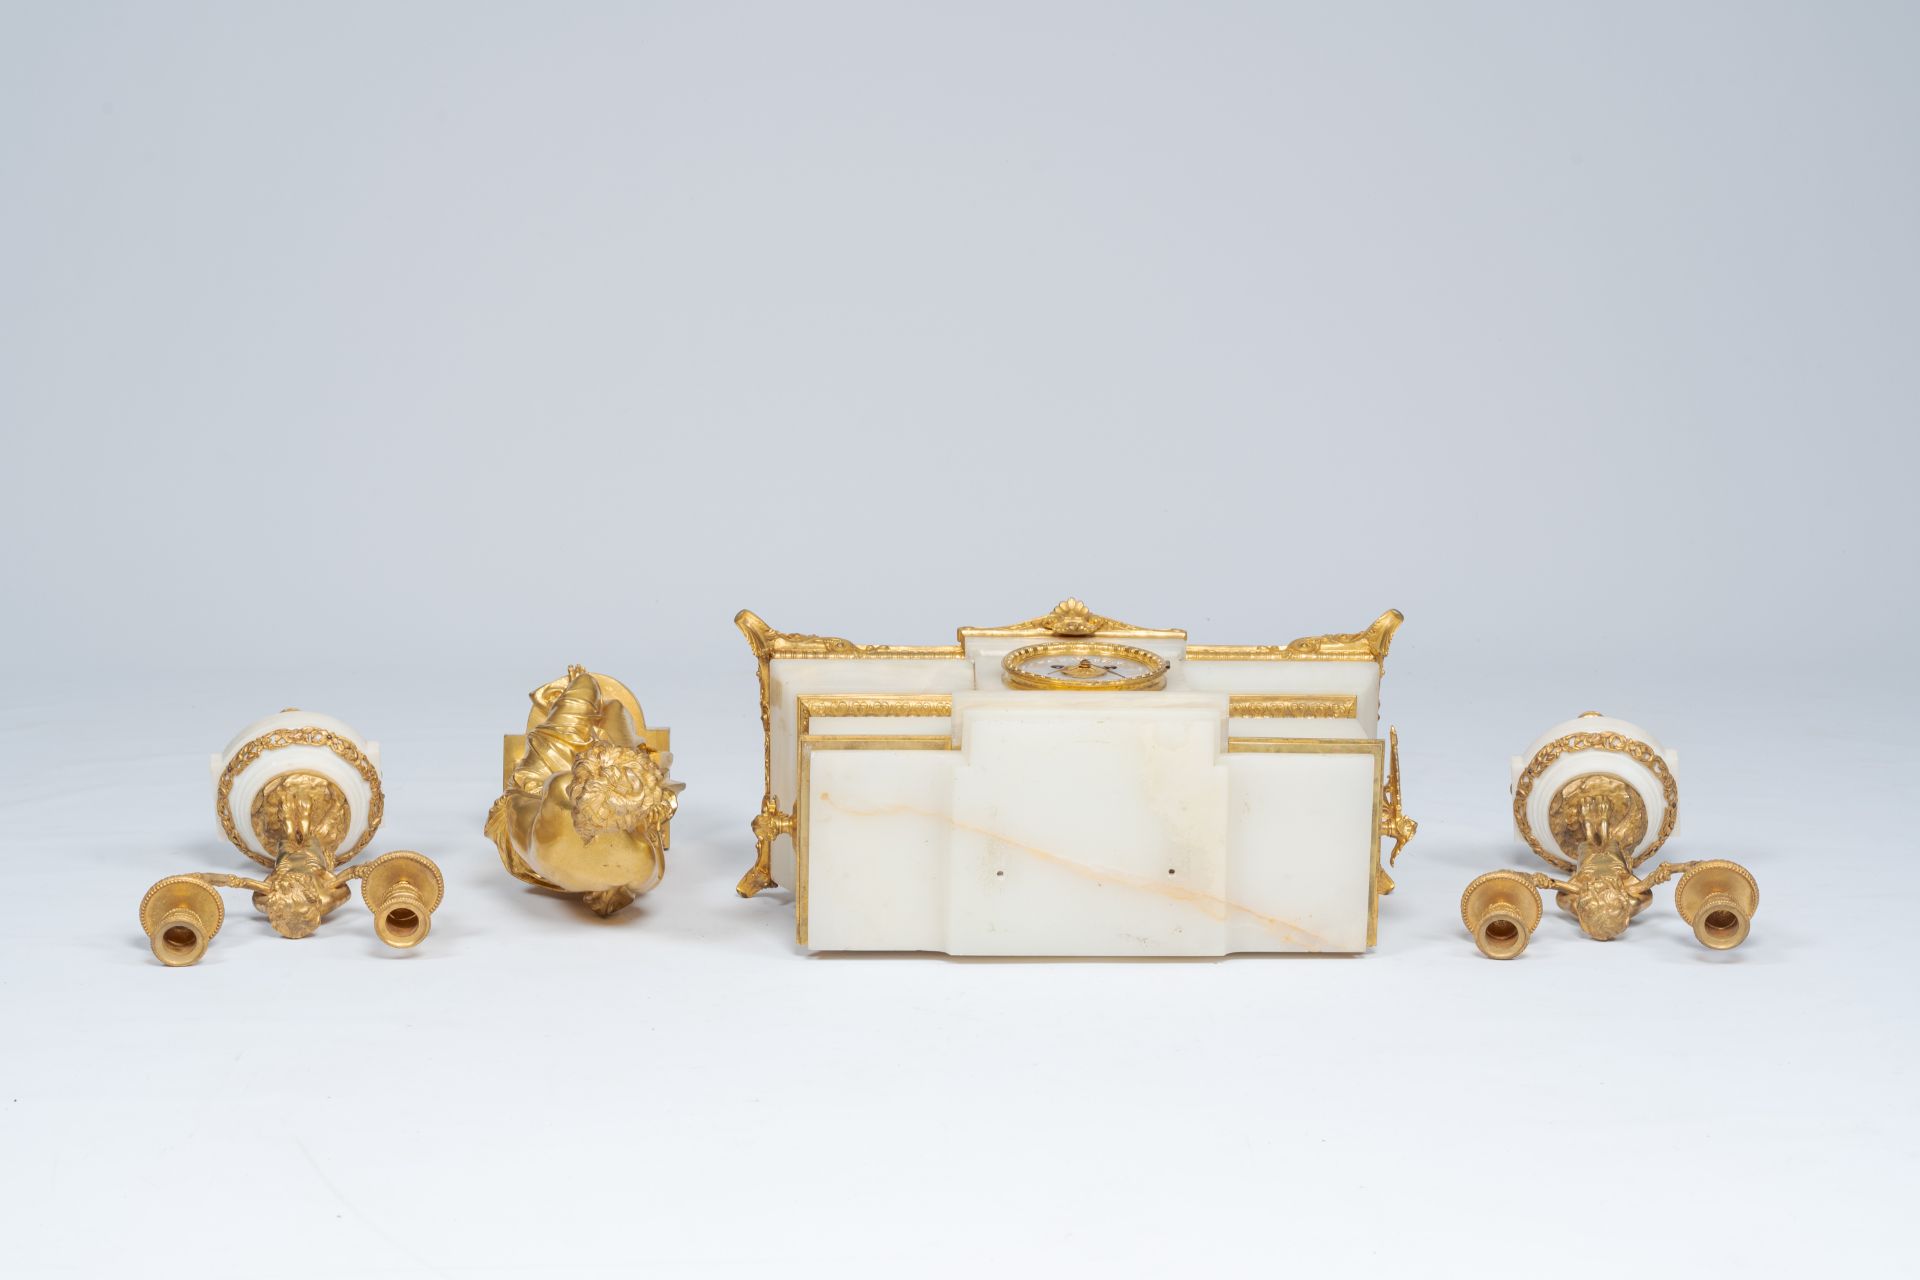 A French gilt bronze mounted marble and alabaster three-piece clock garniture with Susanna and satyr - Image 4 of 7